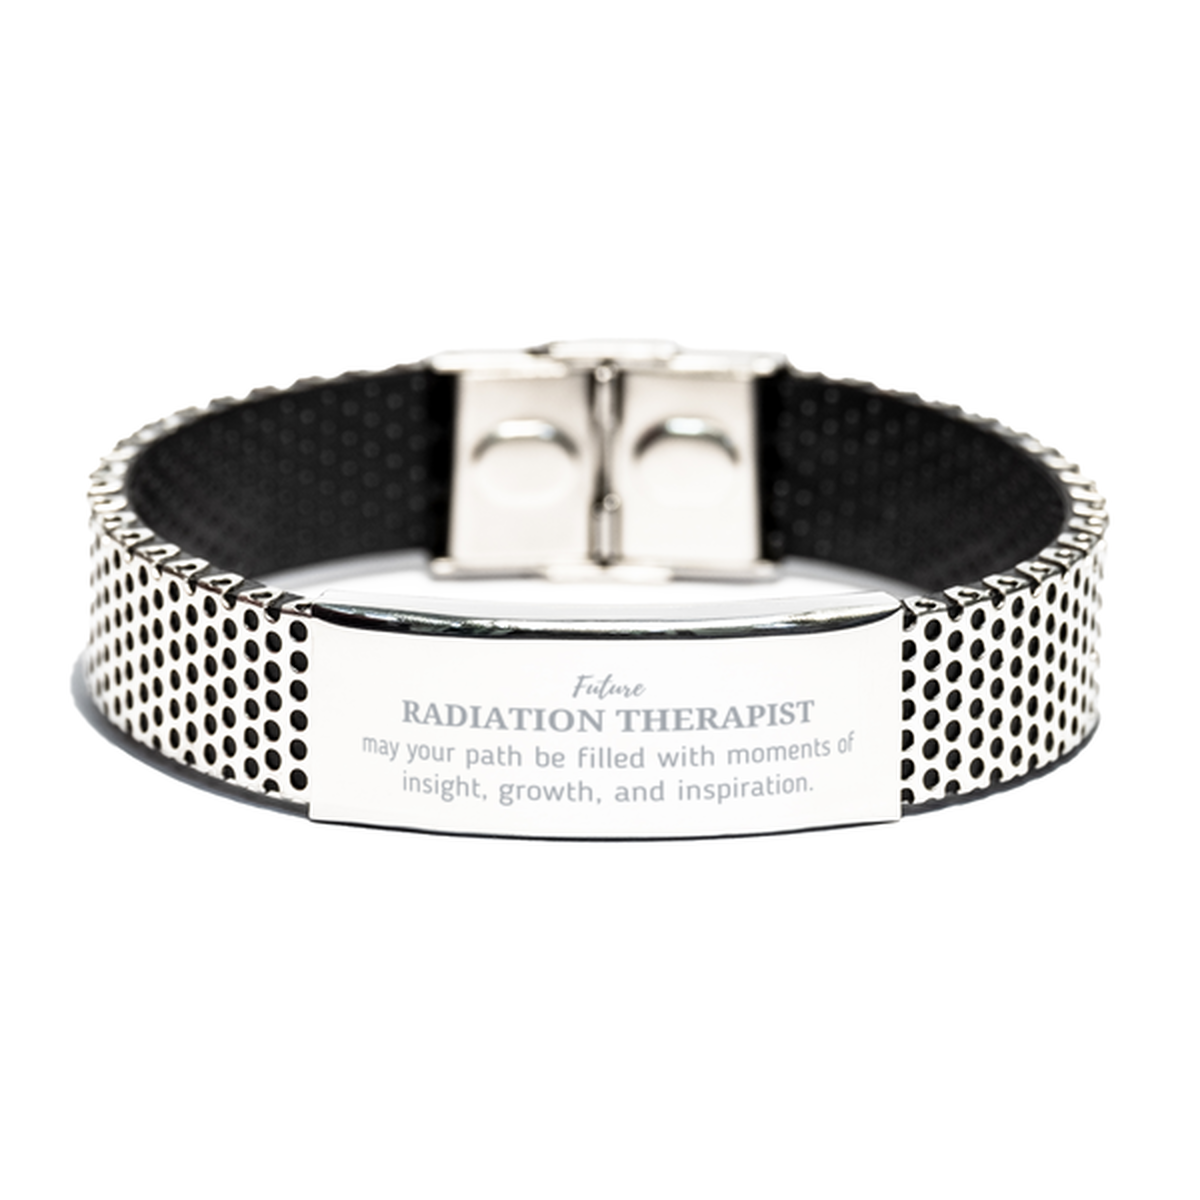 Future Radiation Therapist Gifts, May your path be filled with moments of insight, Graduation Gifts for New Radiation Therapist, Christmas Unique Stainless Steel Bracelet For Men, Women, Friends